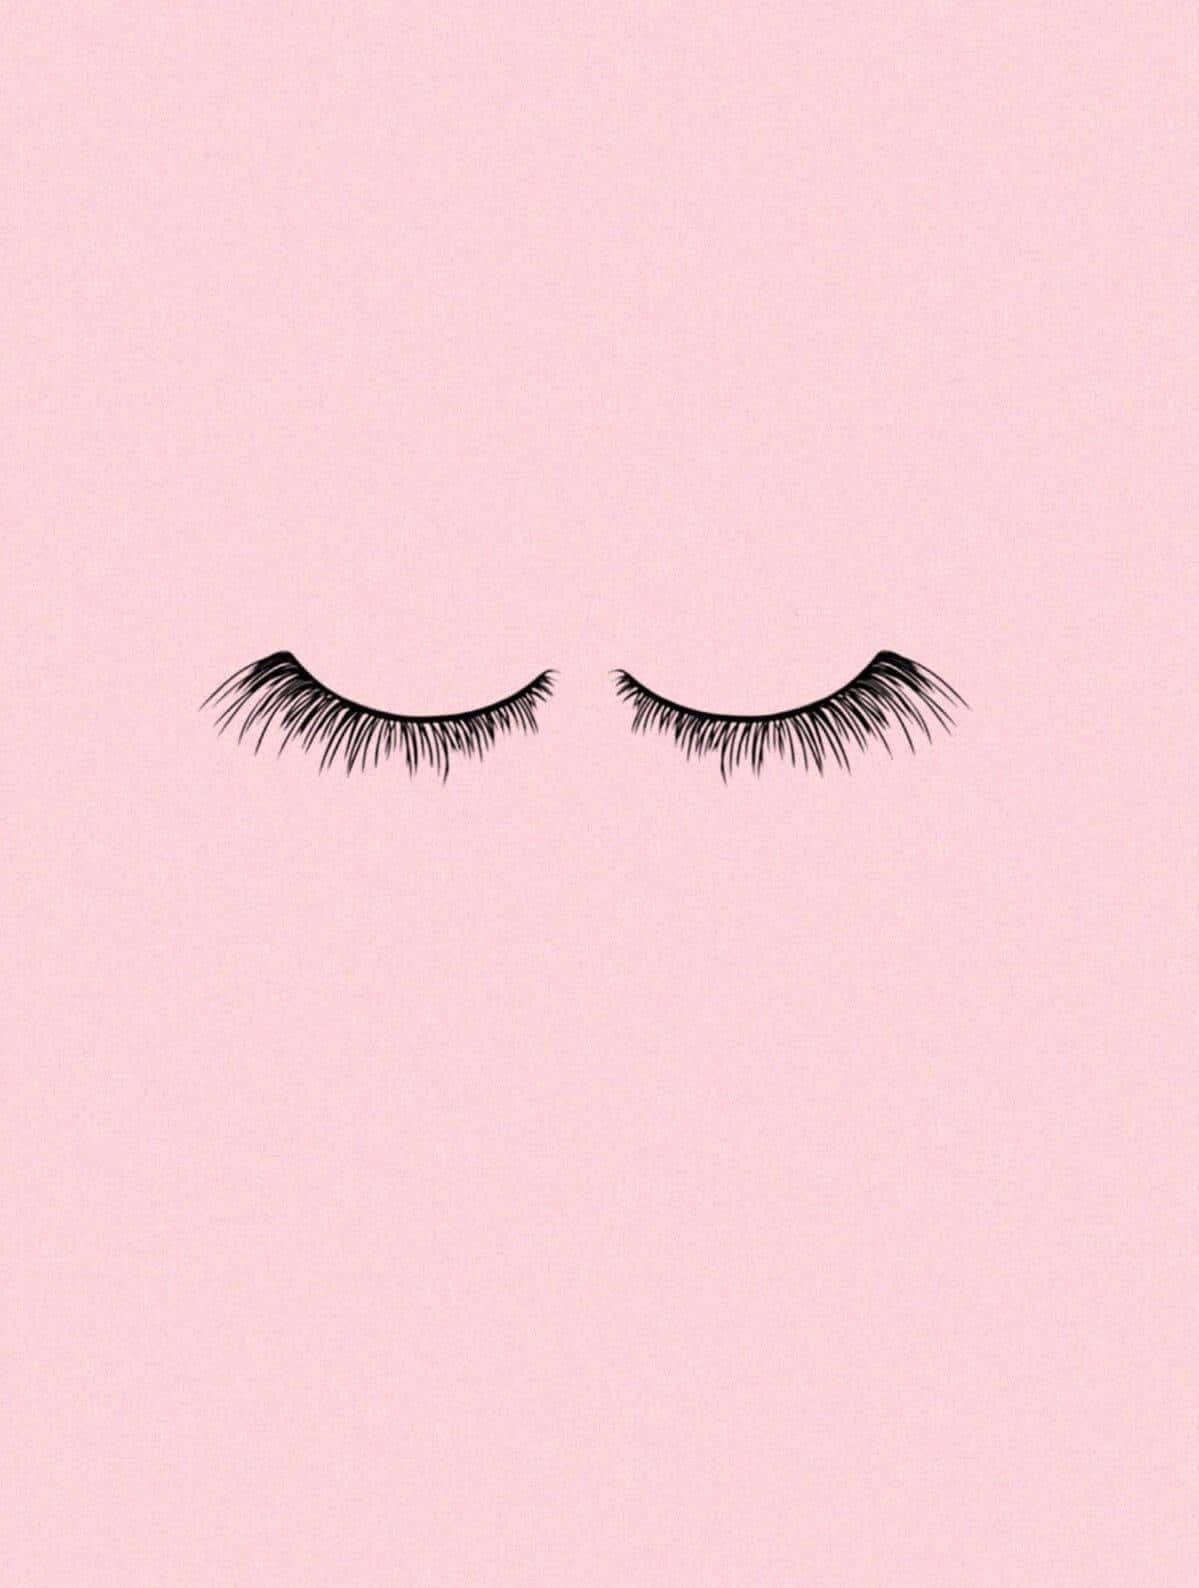 A Close Up Of A Pair Of Eyes On A Pink Background